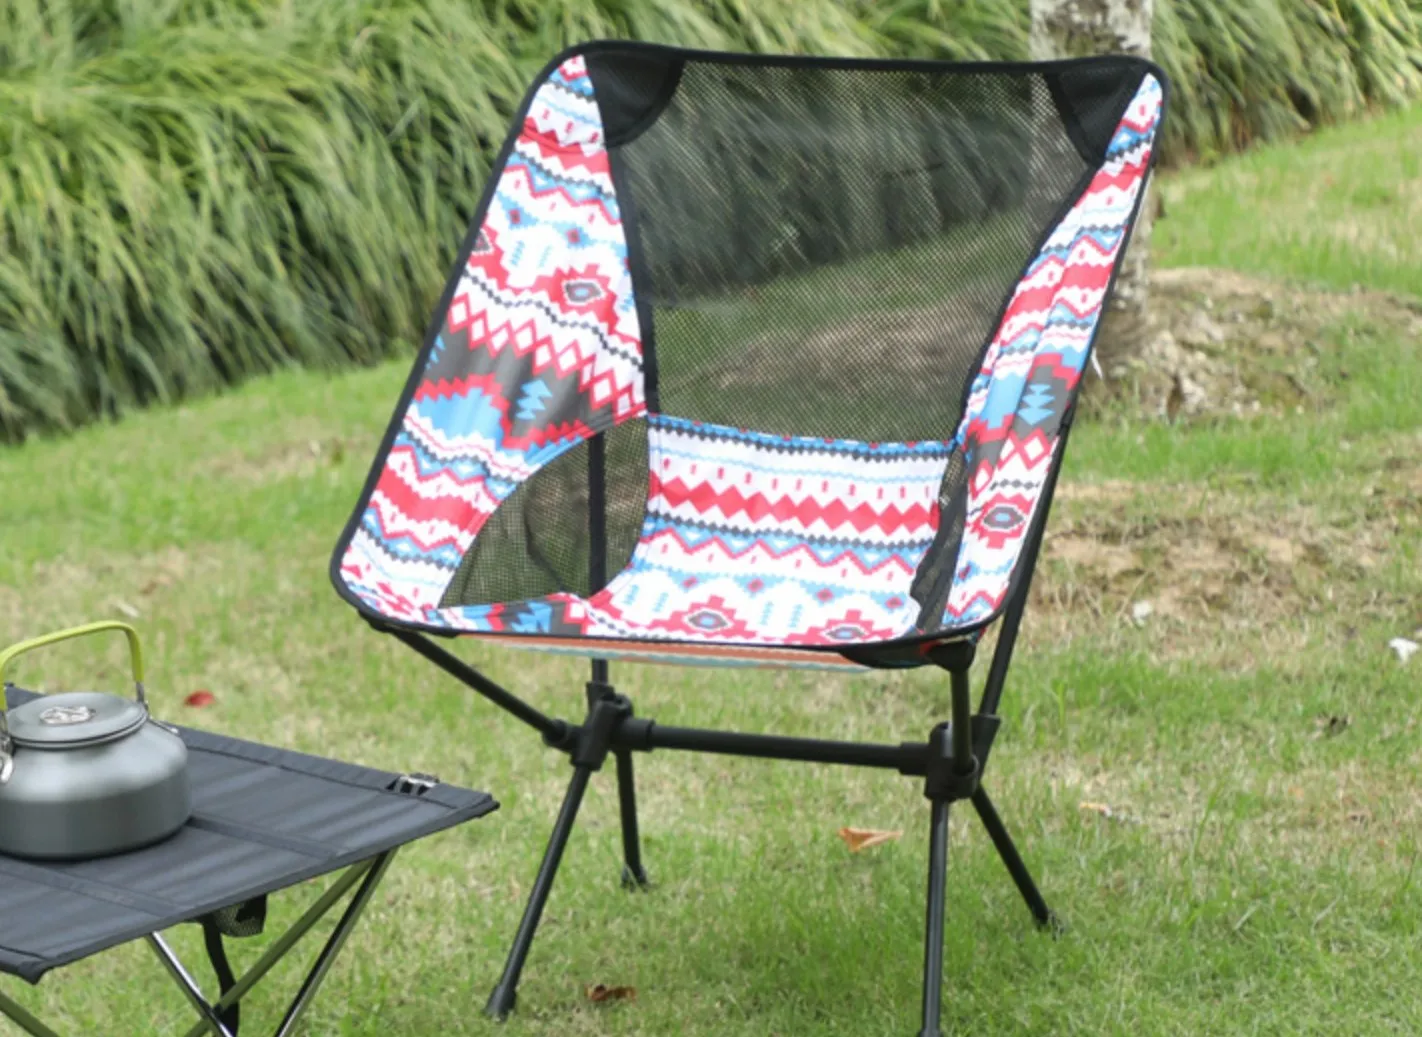 National style super light portable outdoor aluminum folding chair camping moon chair portable actor director chair